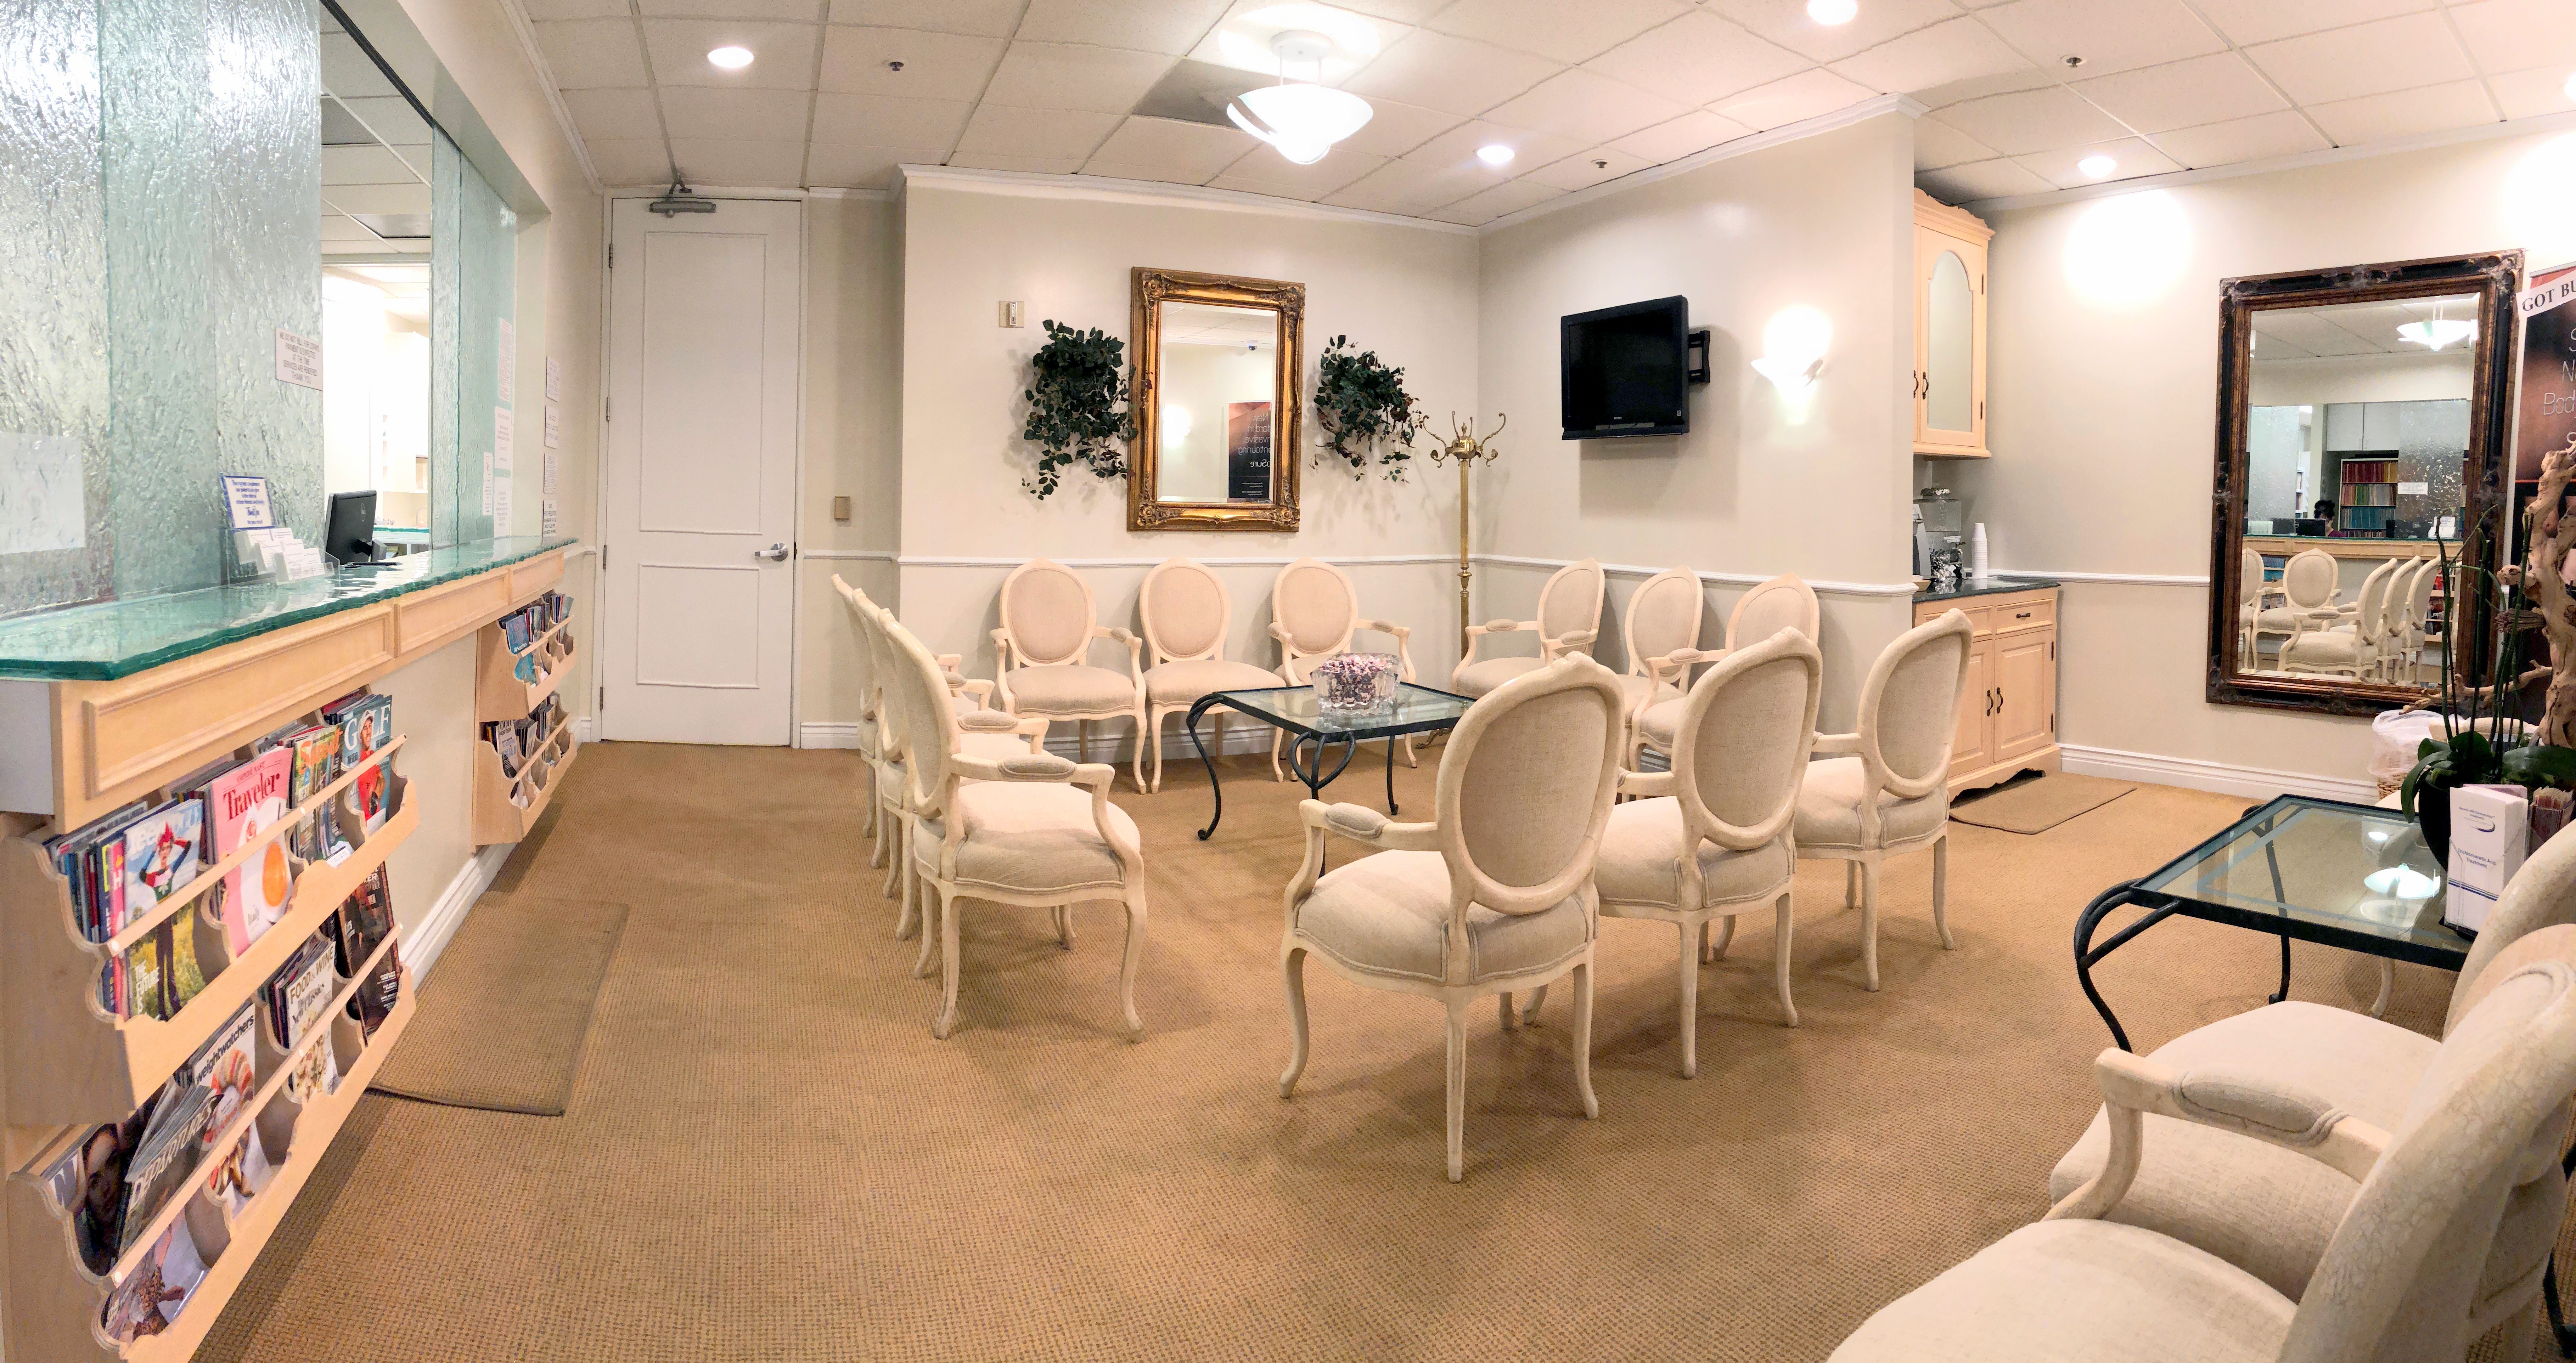 Beverly Hills Dermatology Consultants waiting room